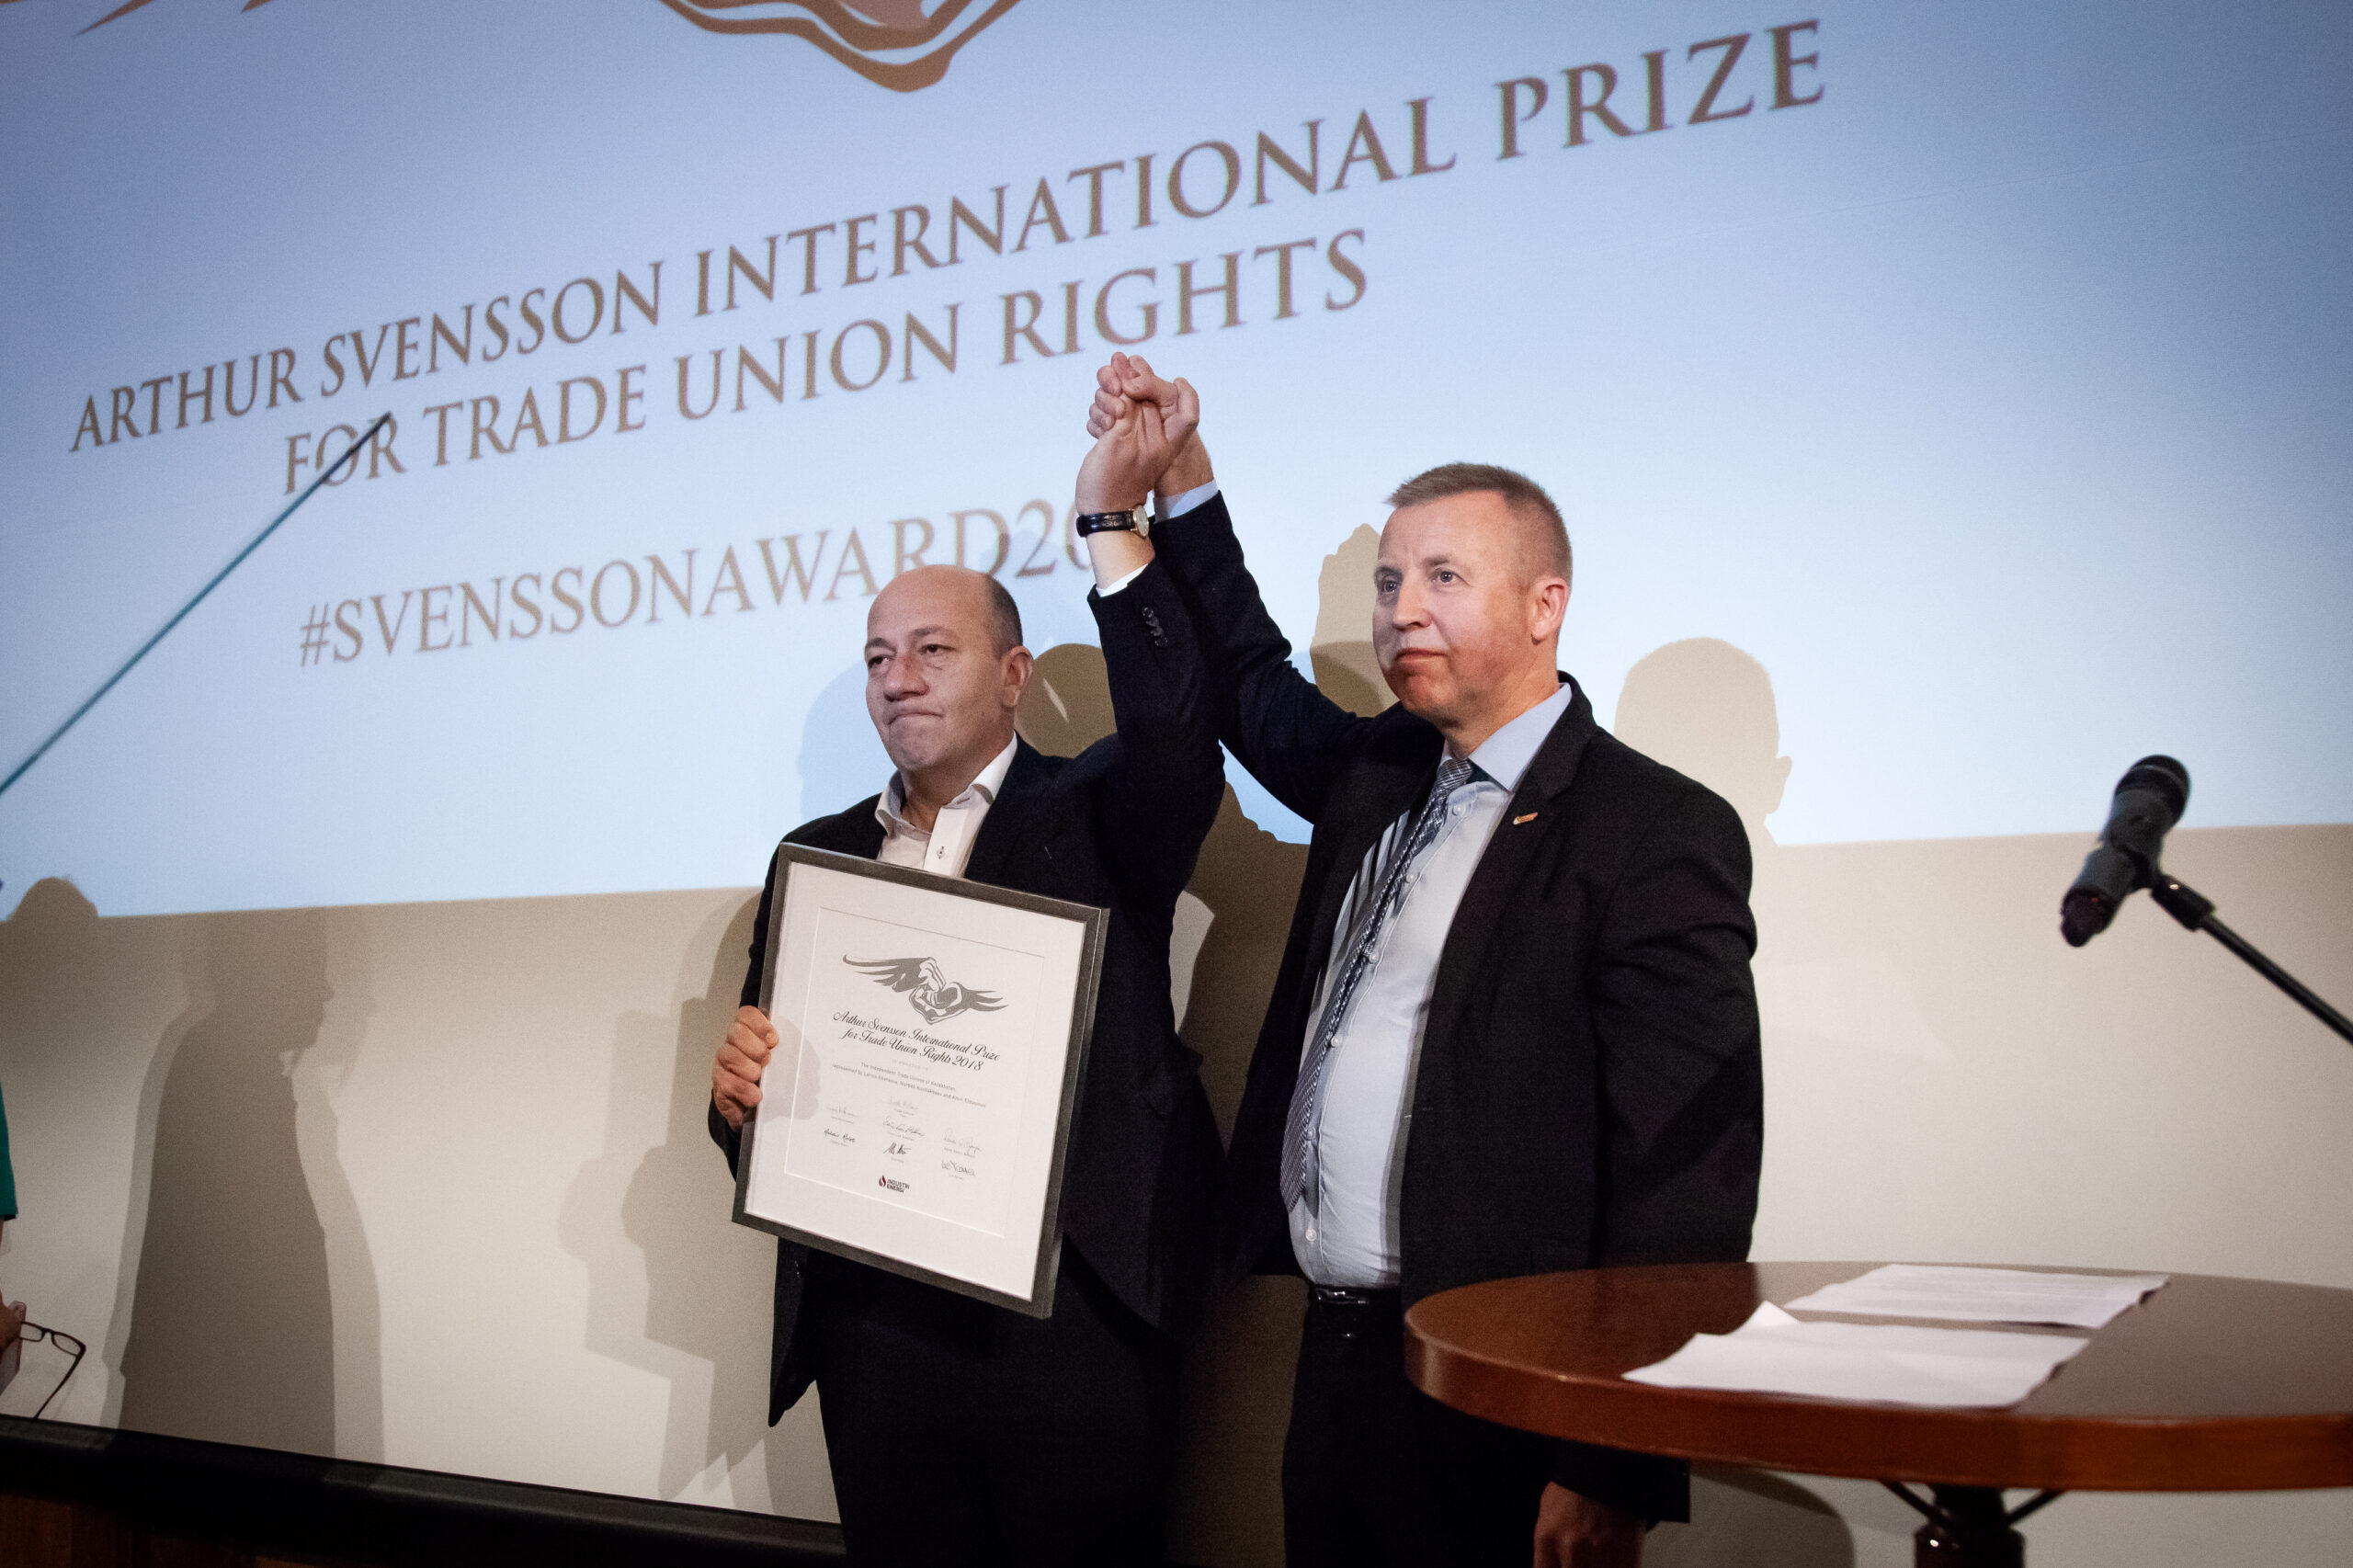 Irakli Petriashvili (ITUC), who in 2018 received the prize on behalf of union leaders from Kazakhstan suffering a travel ban, and chairman of the Prize Committee and president of Industri Energi Frode Alfheim.